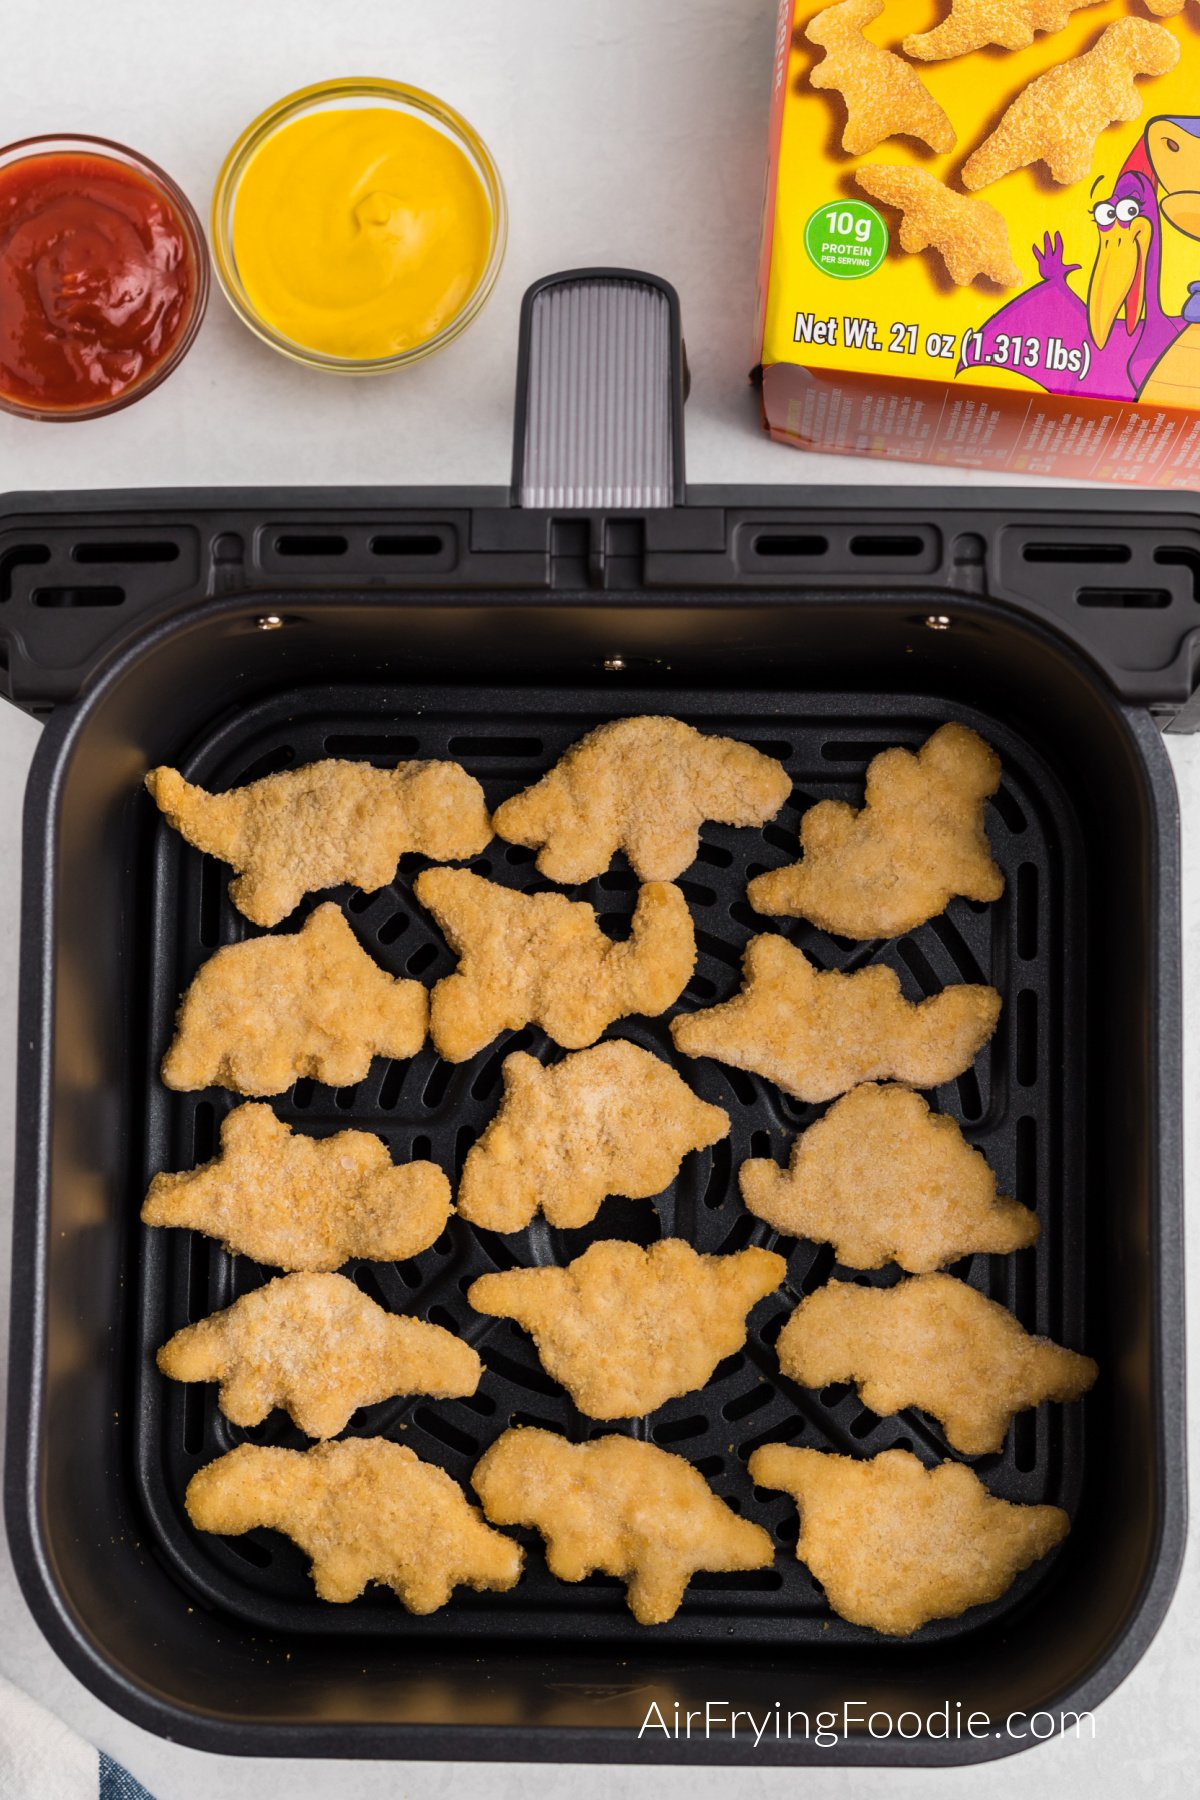 Dino nuggets in the air fryer basket. Ready to cook.